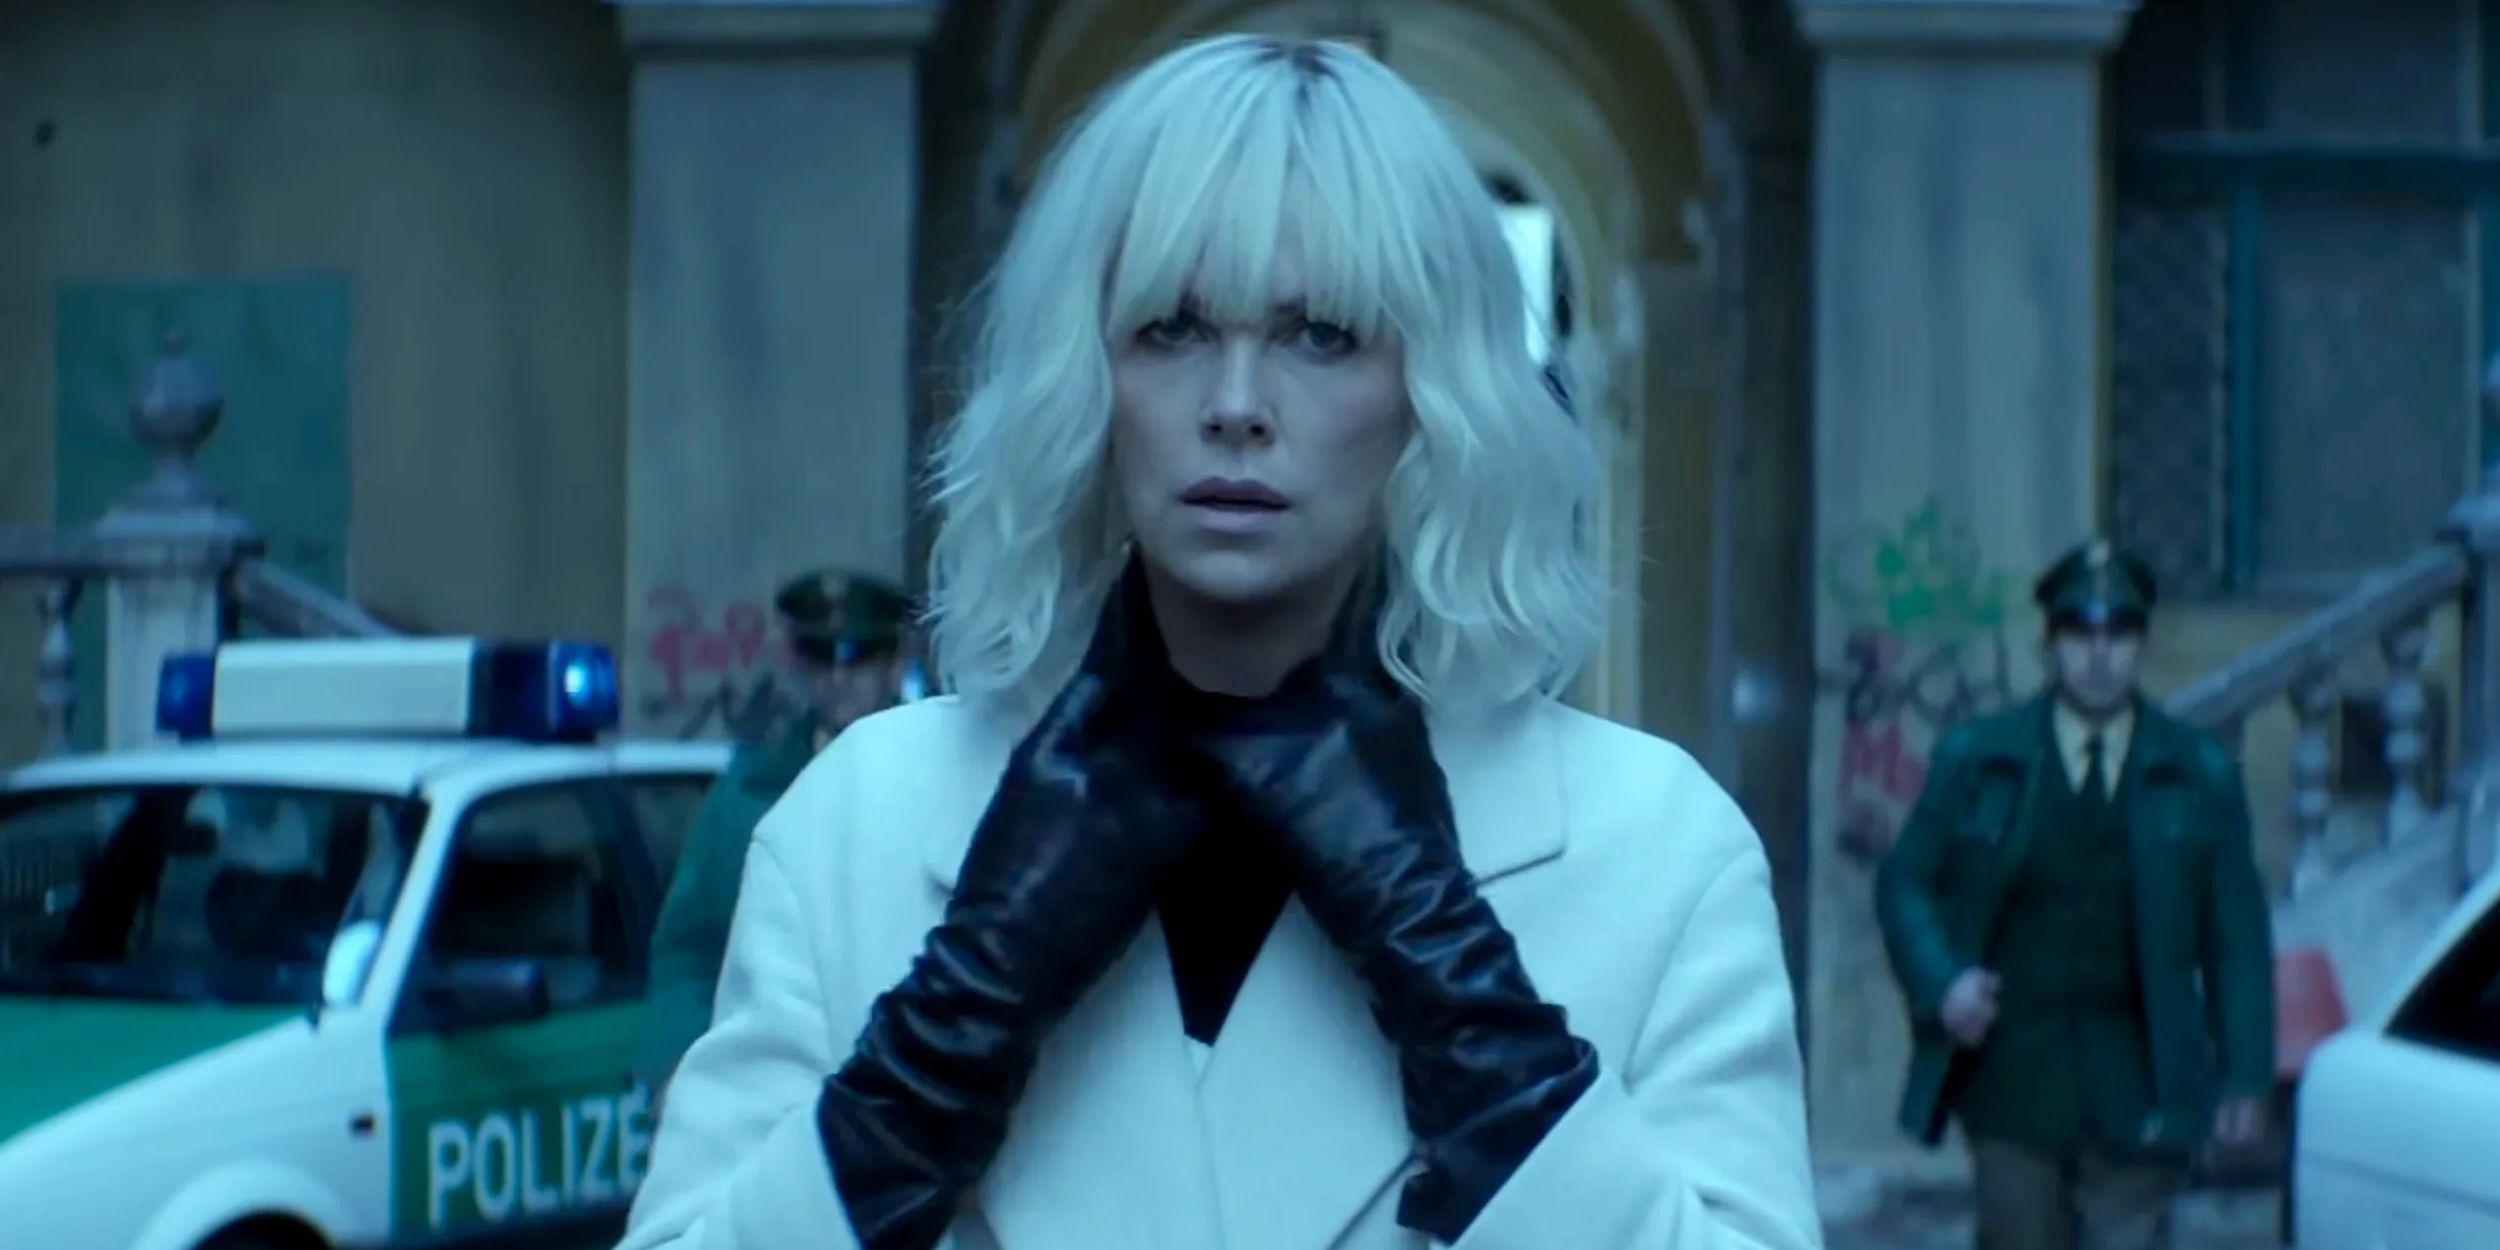 Charlize Theron as Lorraine Broughton in Atomic Blonde